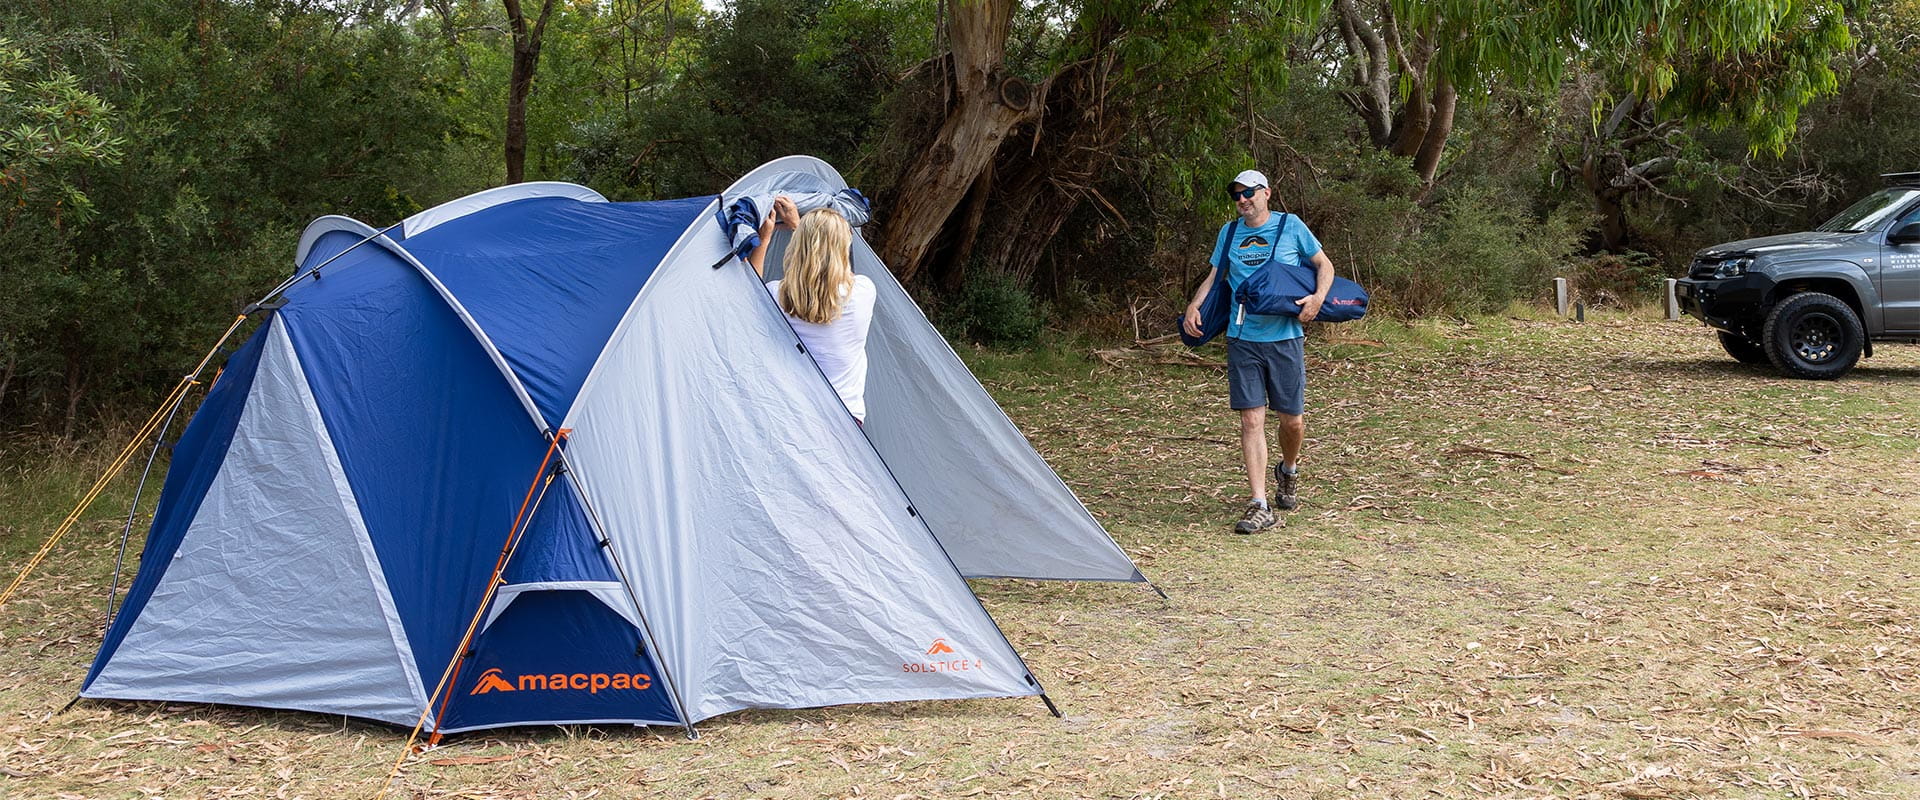 A woman rolls up a tent flap as a man moves more camping gear from the car to the tent.